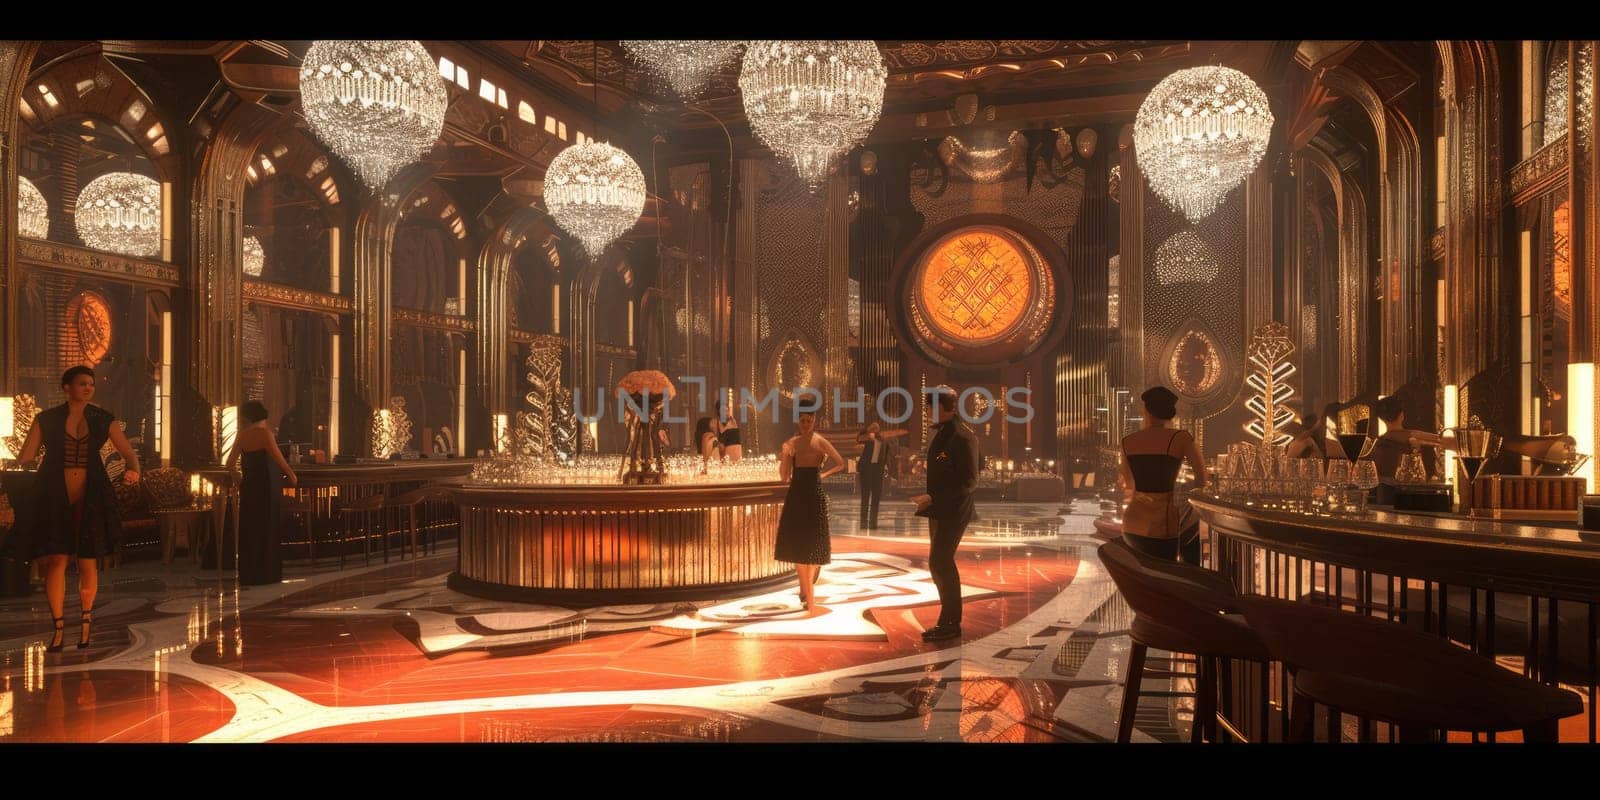 An art deco inspired ballroom from the 1920s, with elegant dancers. Resplendent. by biancoblue